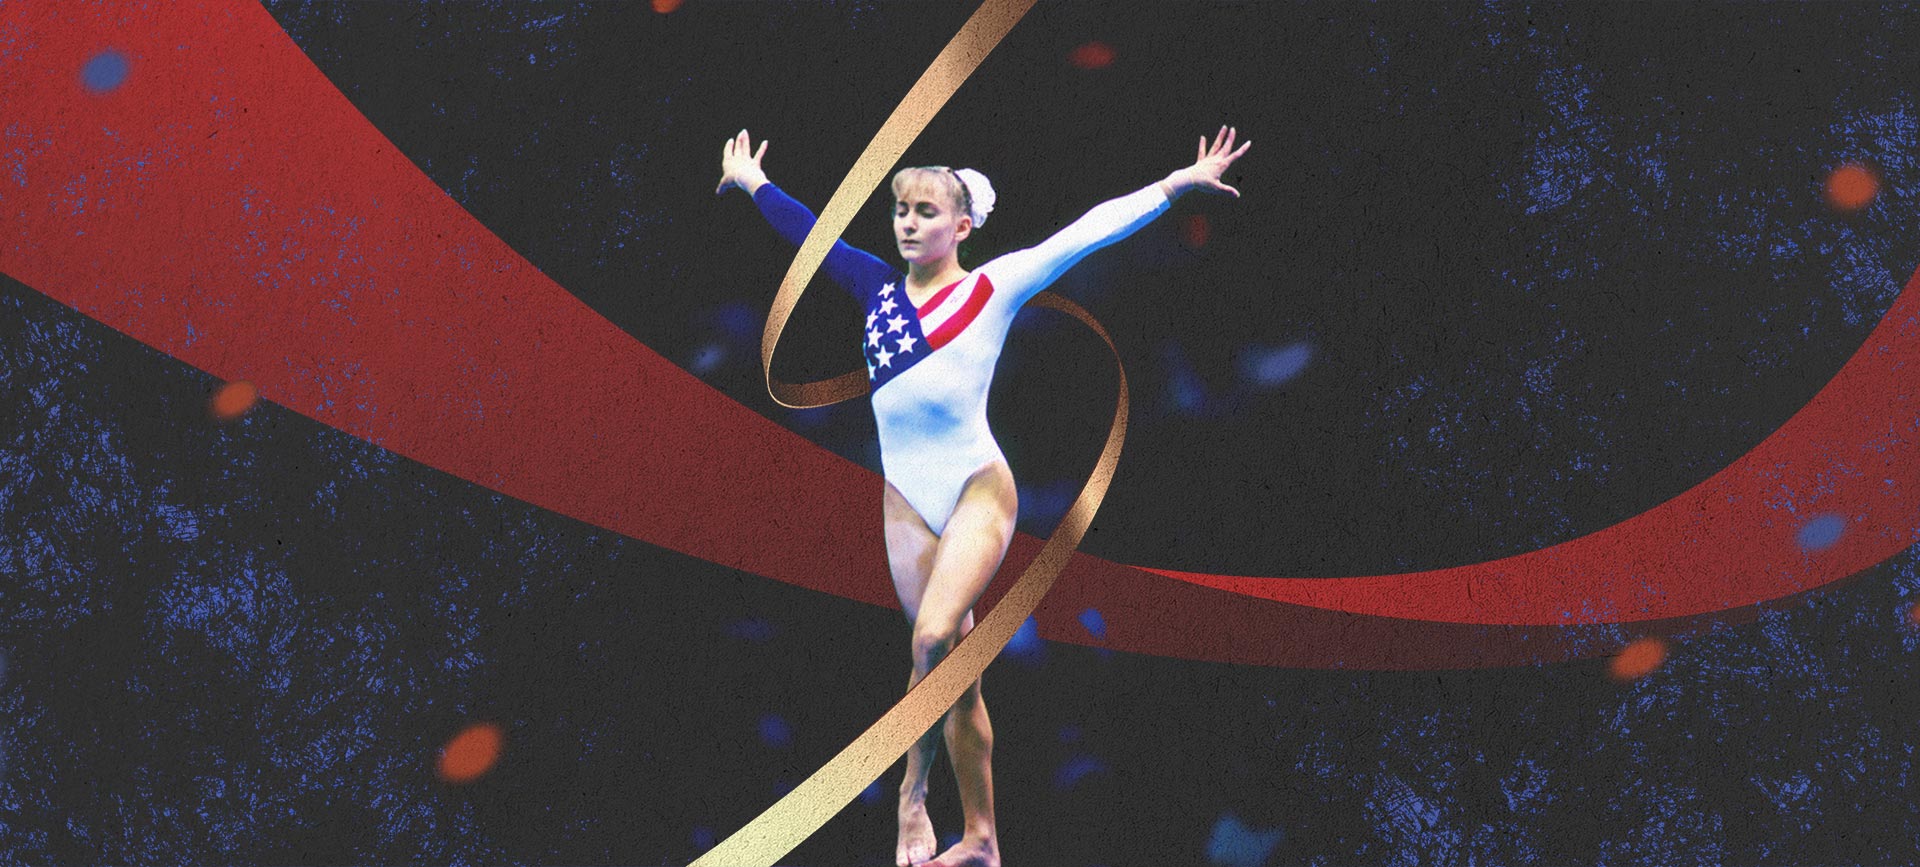 Shannon Miller competes on the balance beam with red and gold ribbons around her.